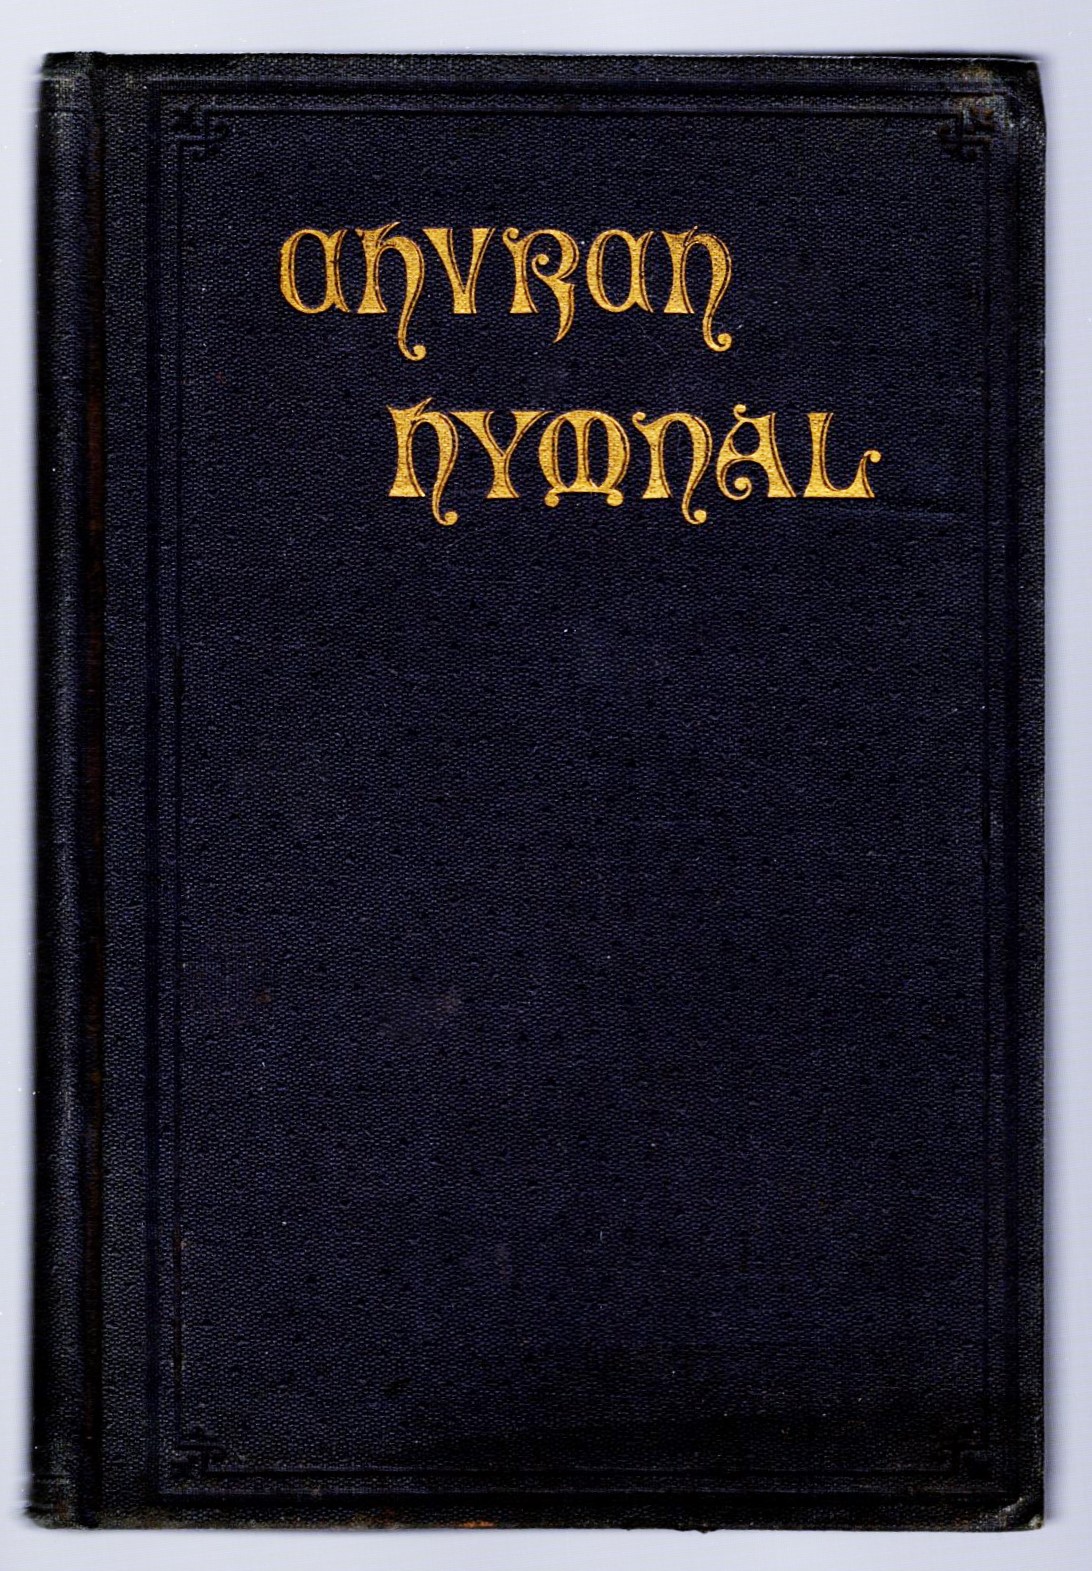 Image for Church Hymnal, A, Compiled from the Prayer Book Hymnal :   (Episcopalian) and from the Additional Hymns, Hymns Ancient and Modern, and Hymns for Church and Home, with Music